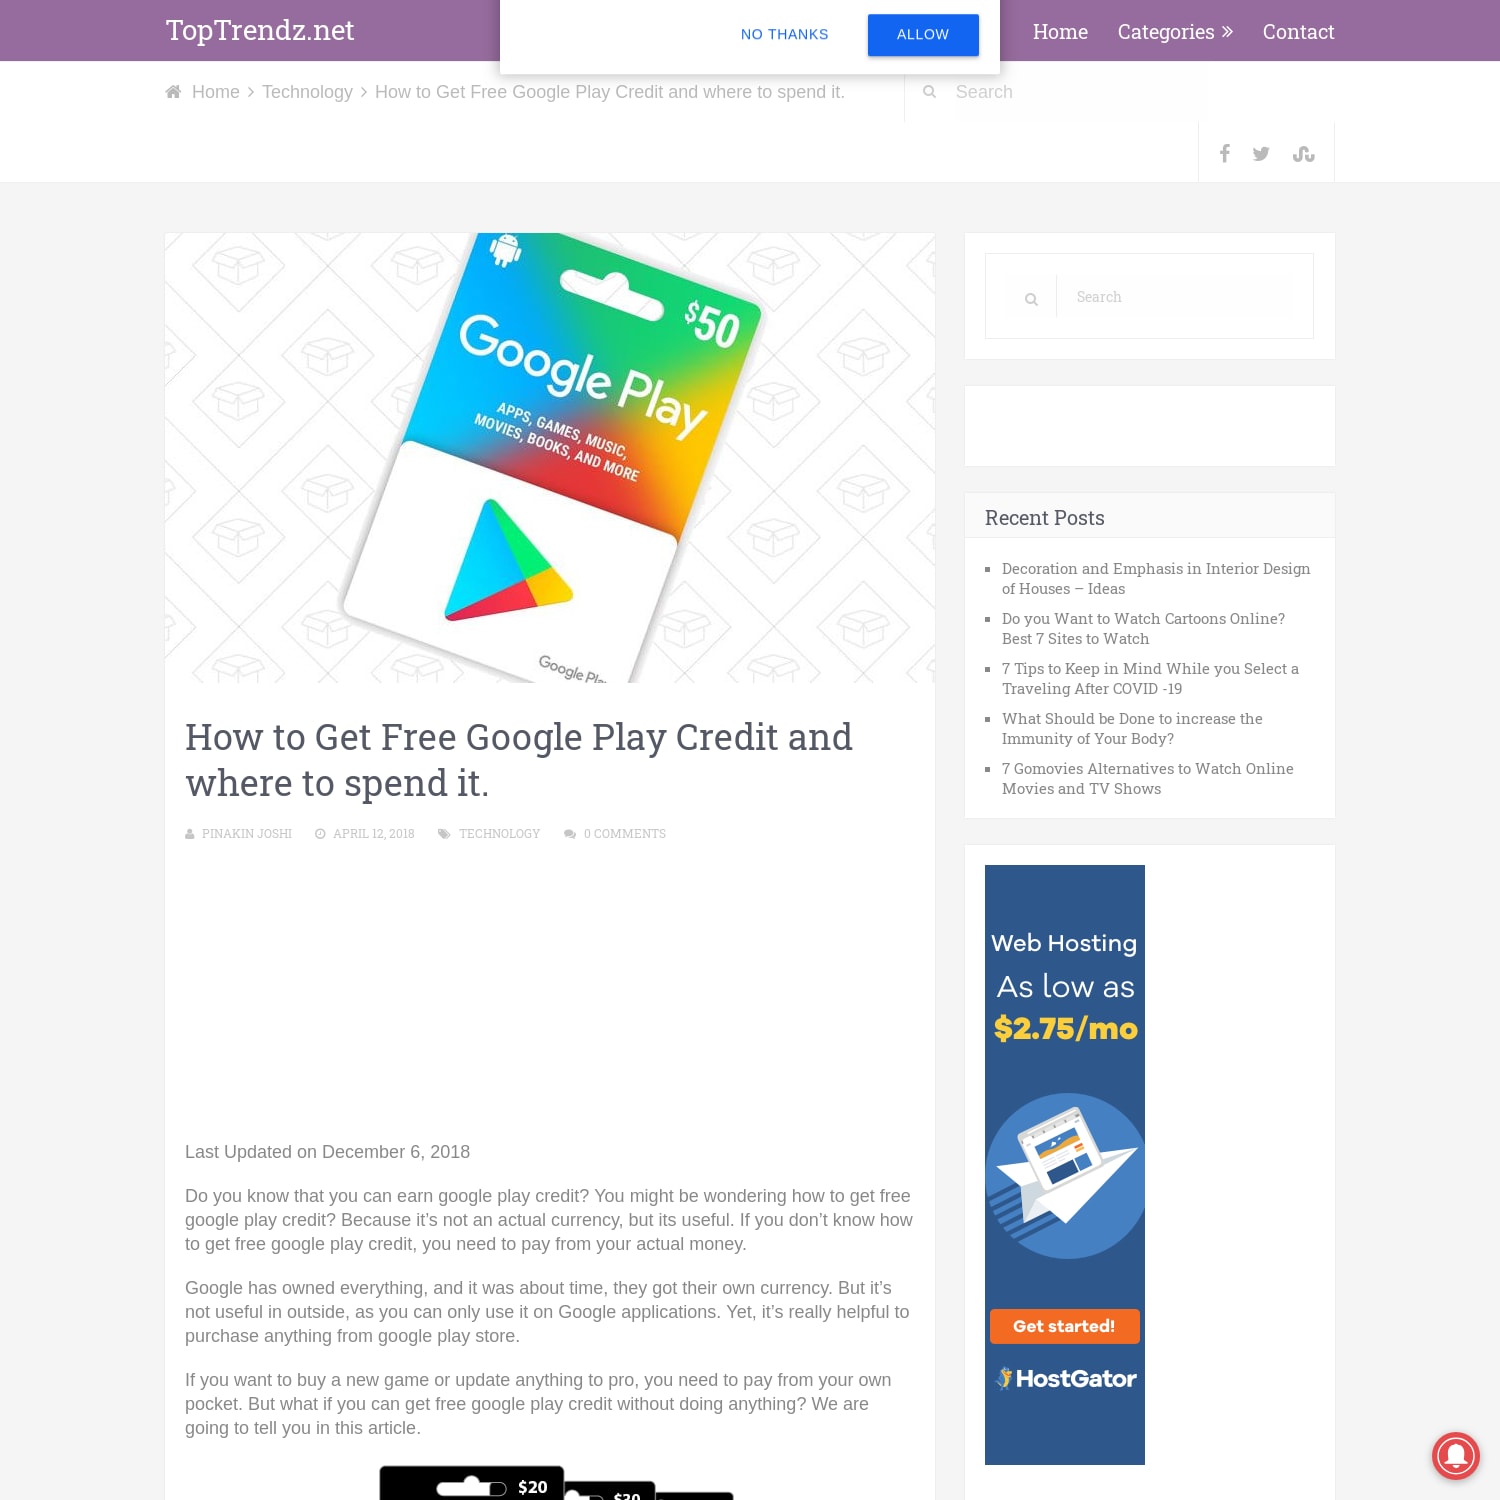 How to Get Free Google Play Credit and where to spend it.